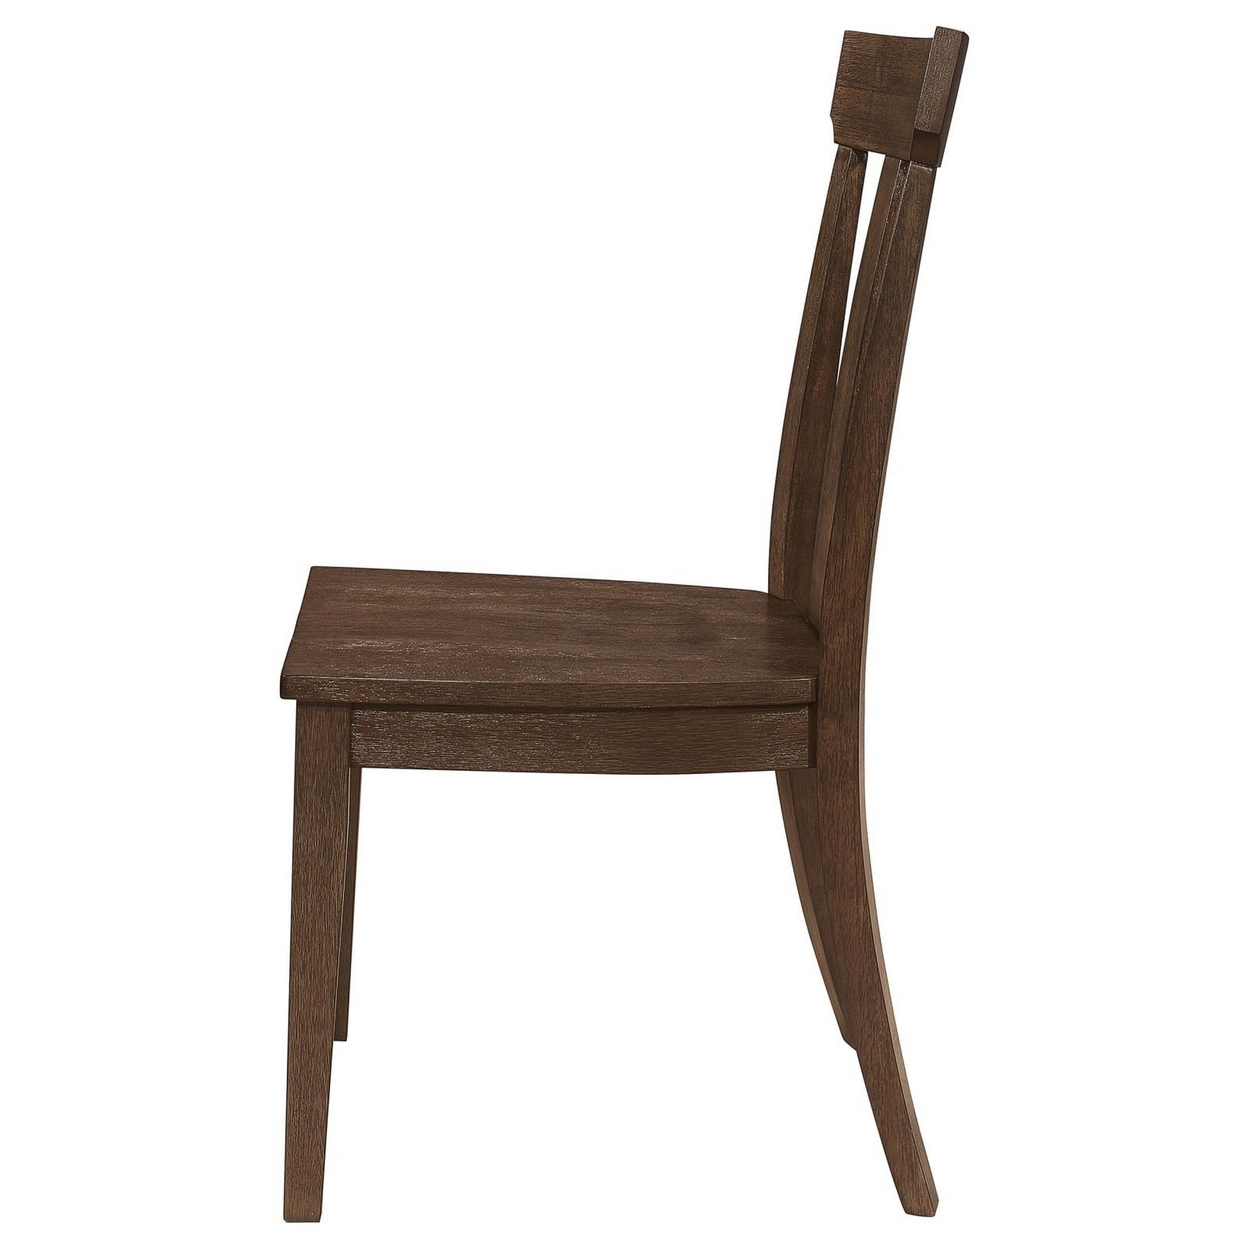 Riza 23 Inch Dining Chair, Set Of 2, Wire Brushed, Slatted Back, Rich Brown -Saltoro Sherpi